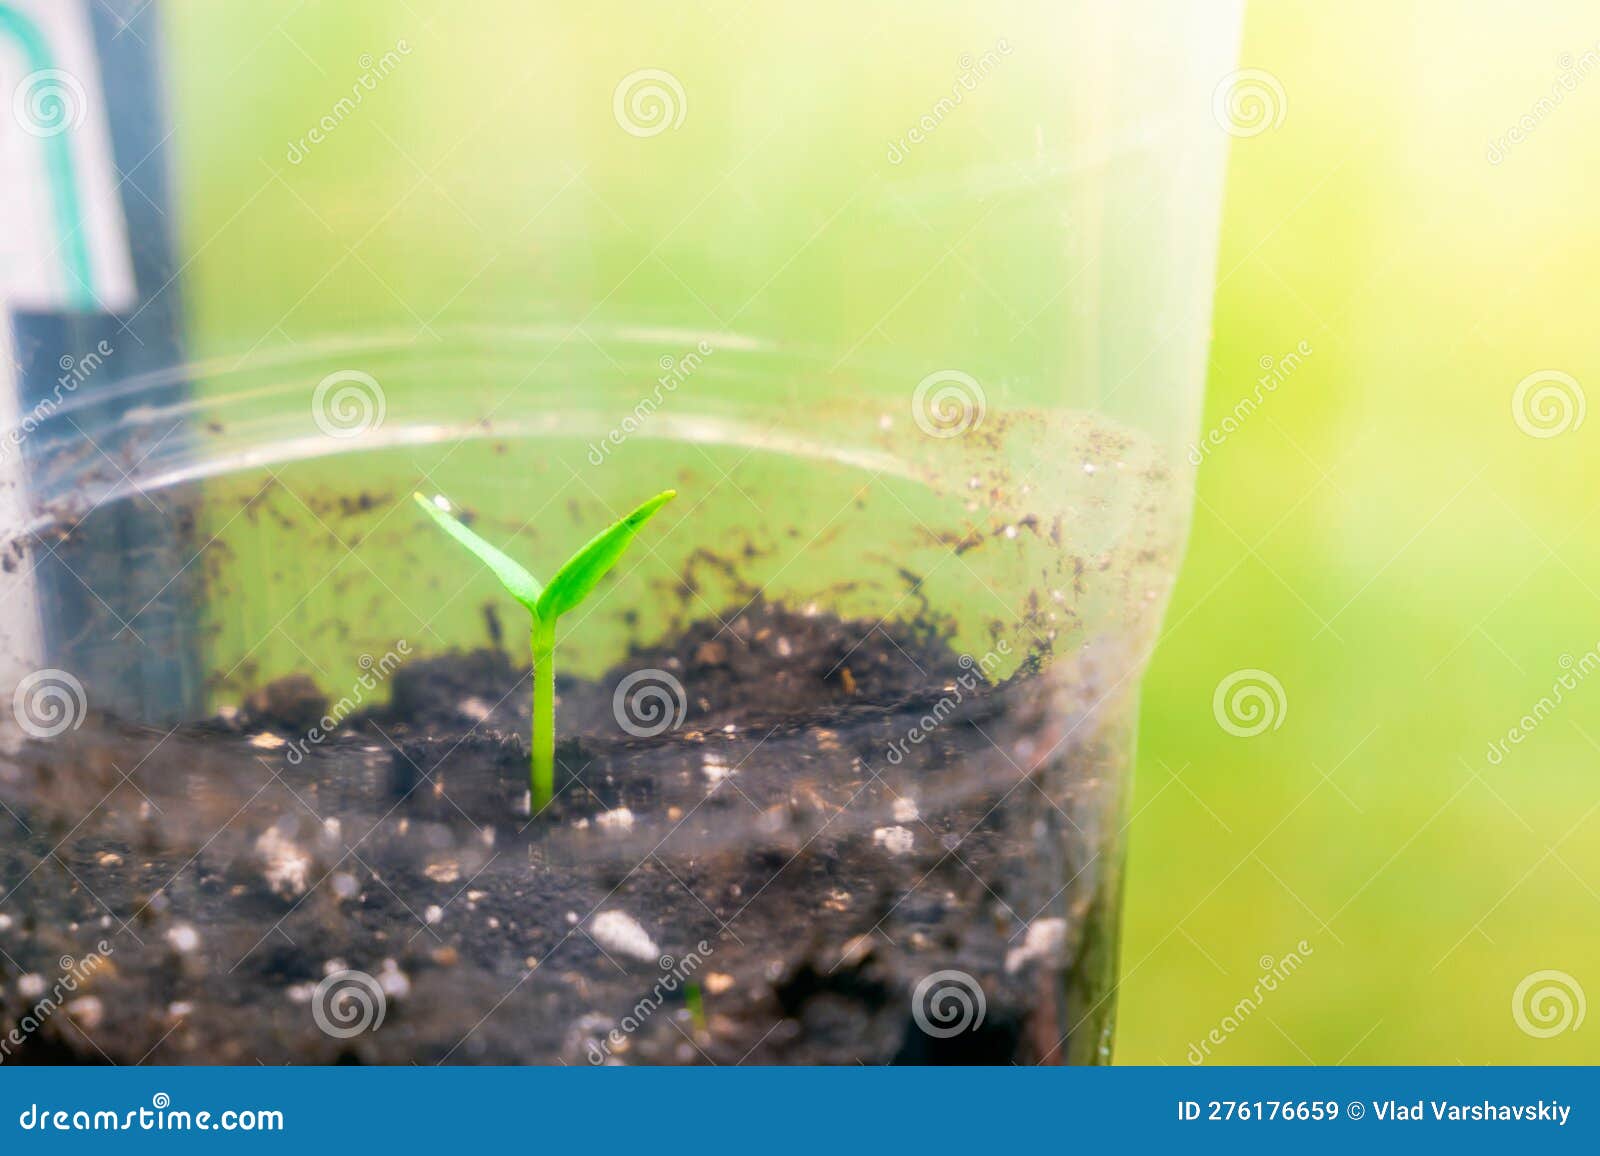 seedlings in a transparent plastic cup close-up. the first germinal leaves of a germinated plant from a seed